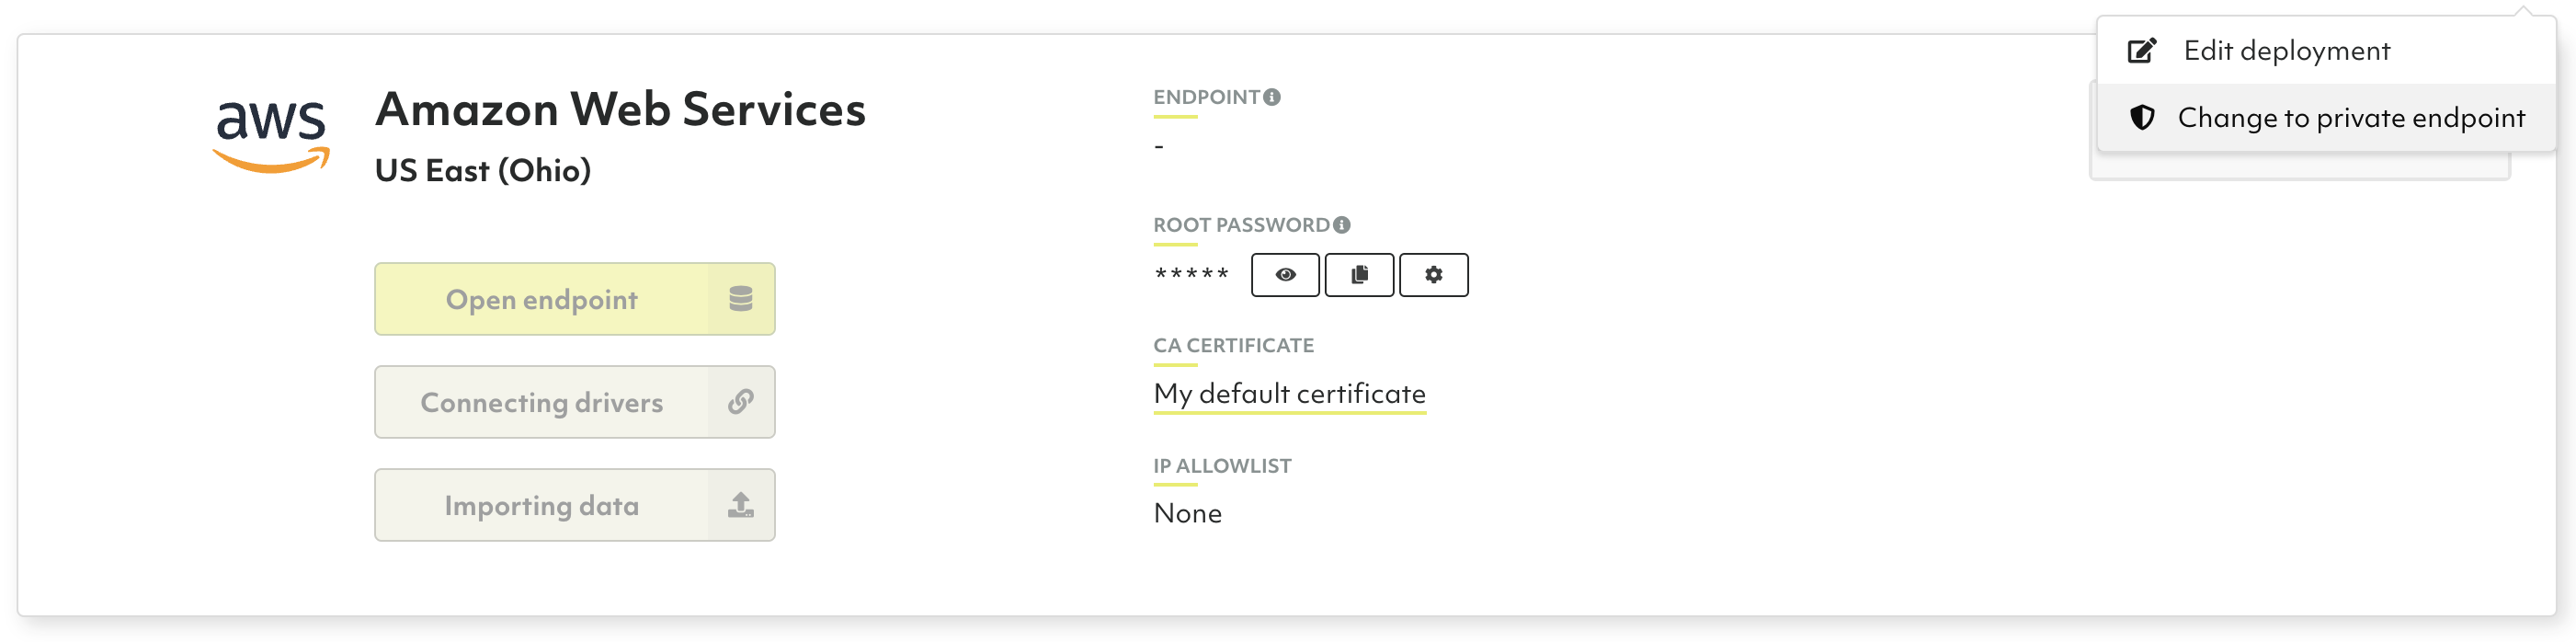 ArangoGraph Deployment AWS Change to Private Endpoint